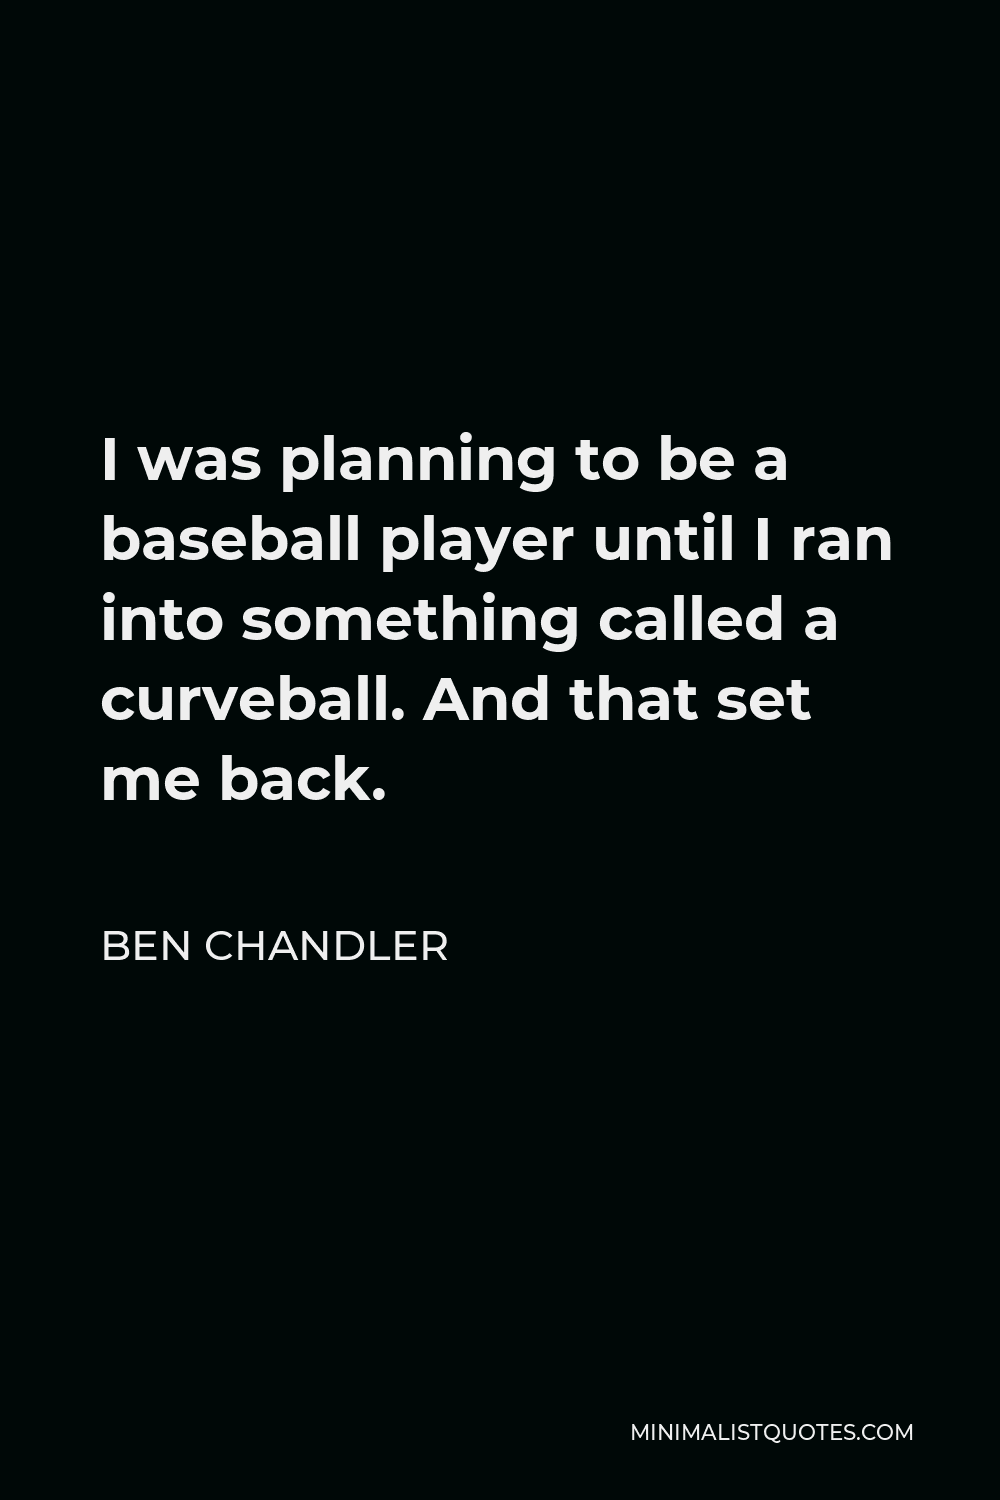 Ben Chandler Quote - I was planning to be a baseball player until I ran into something called a curveball. And that set me back.